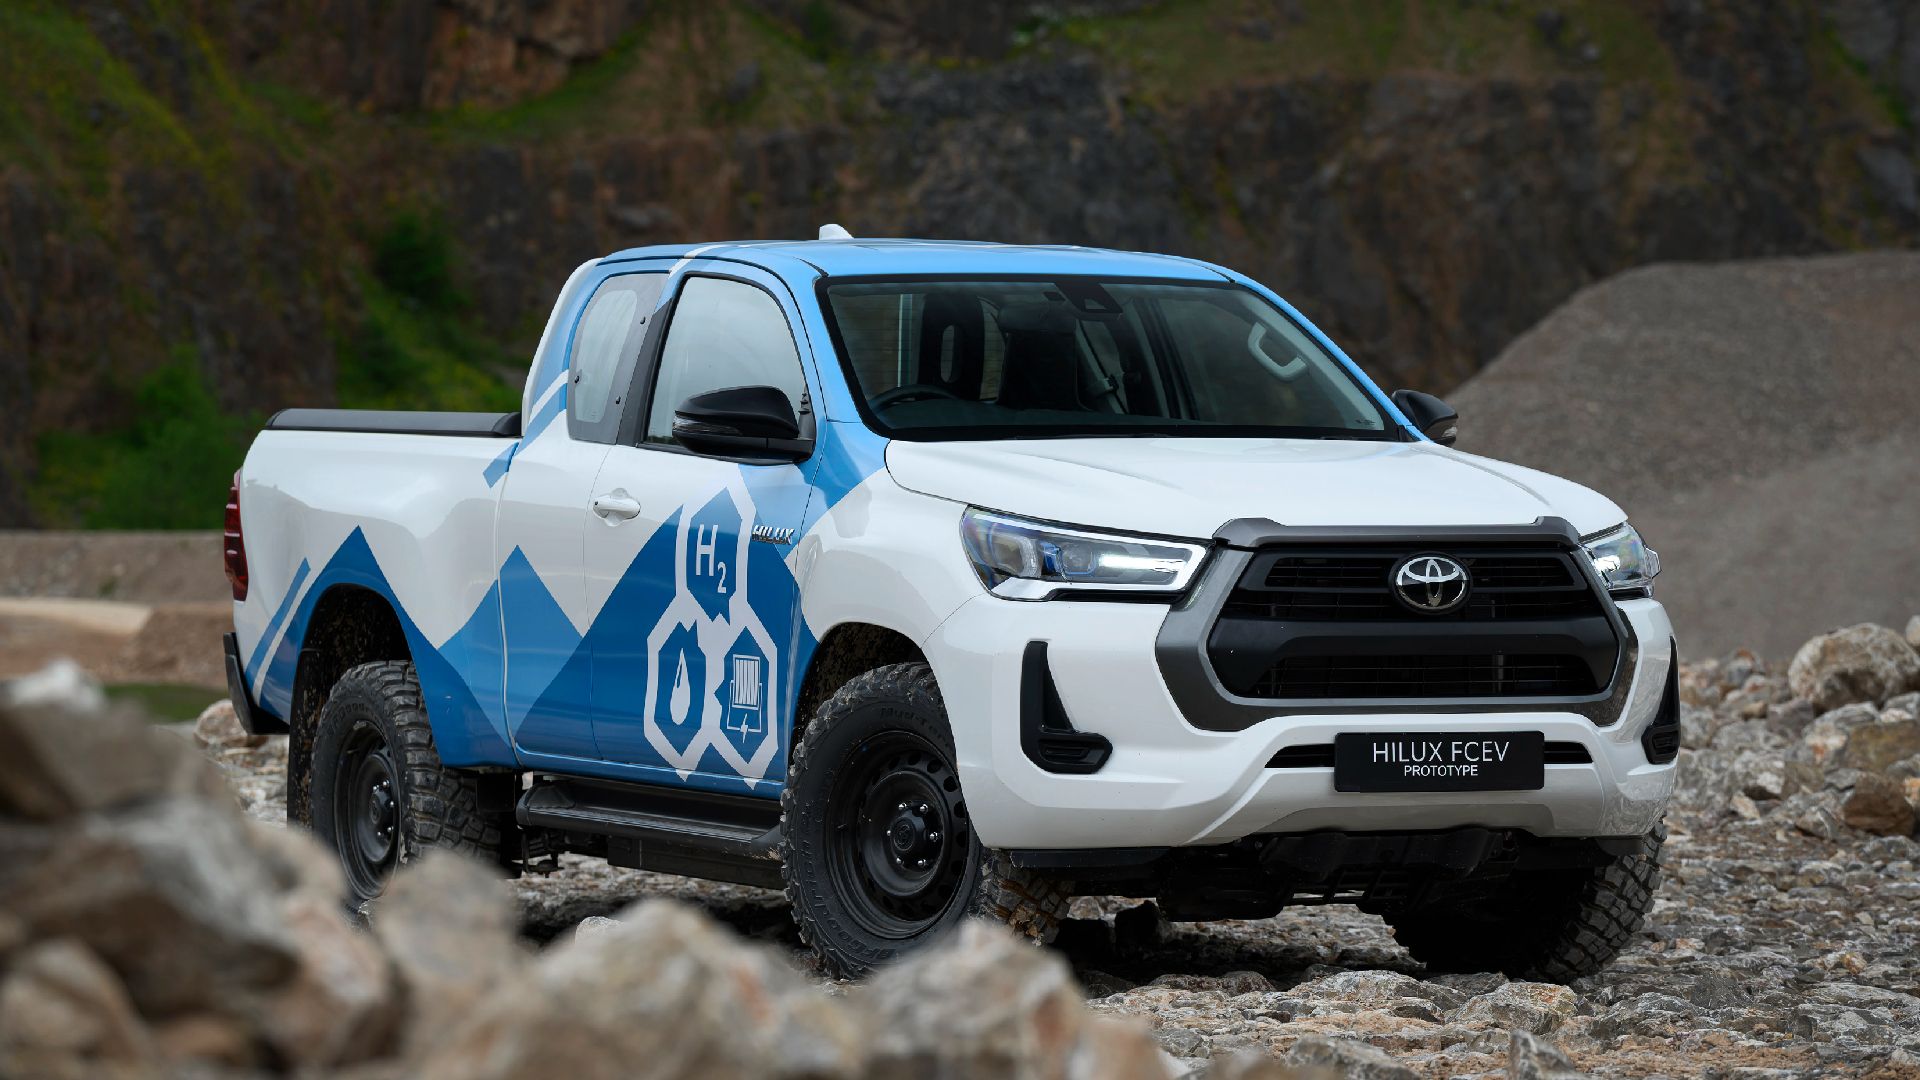 Toyota's hydrogen-powered Hilux project reaches demonstration stage (Source: Toyota)